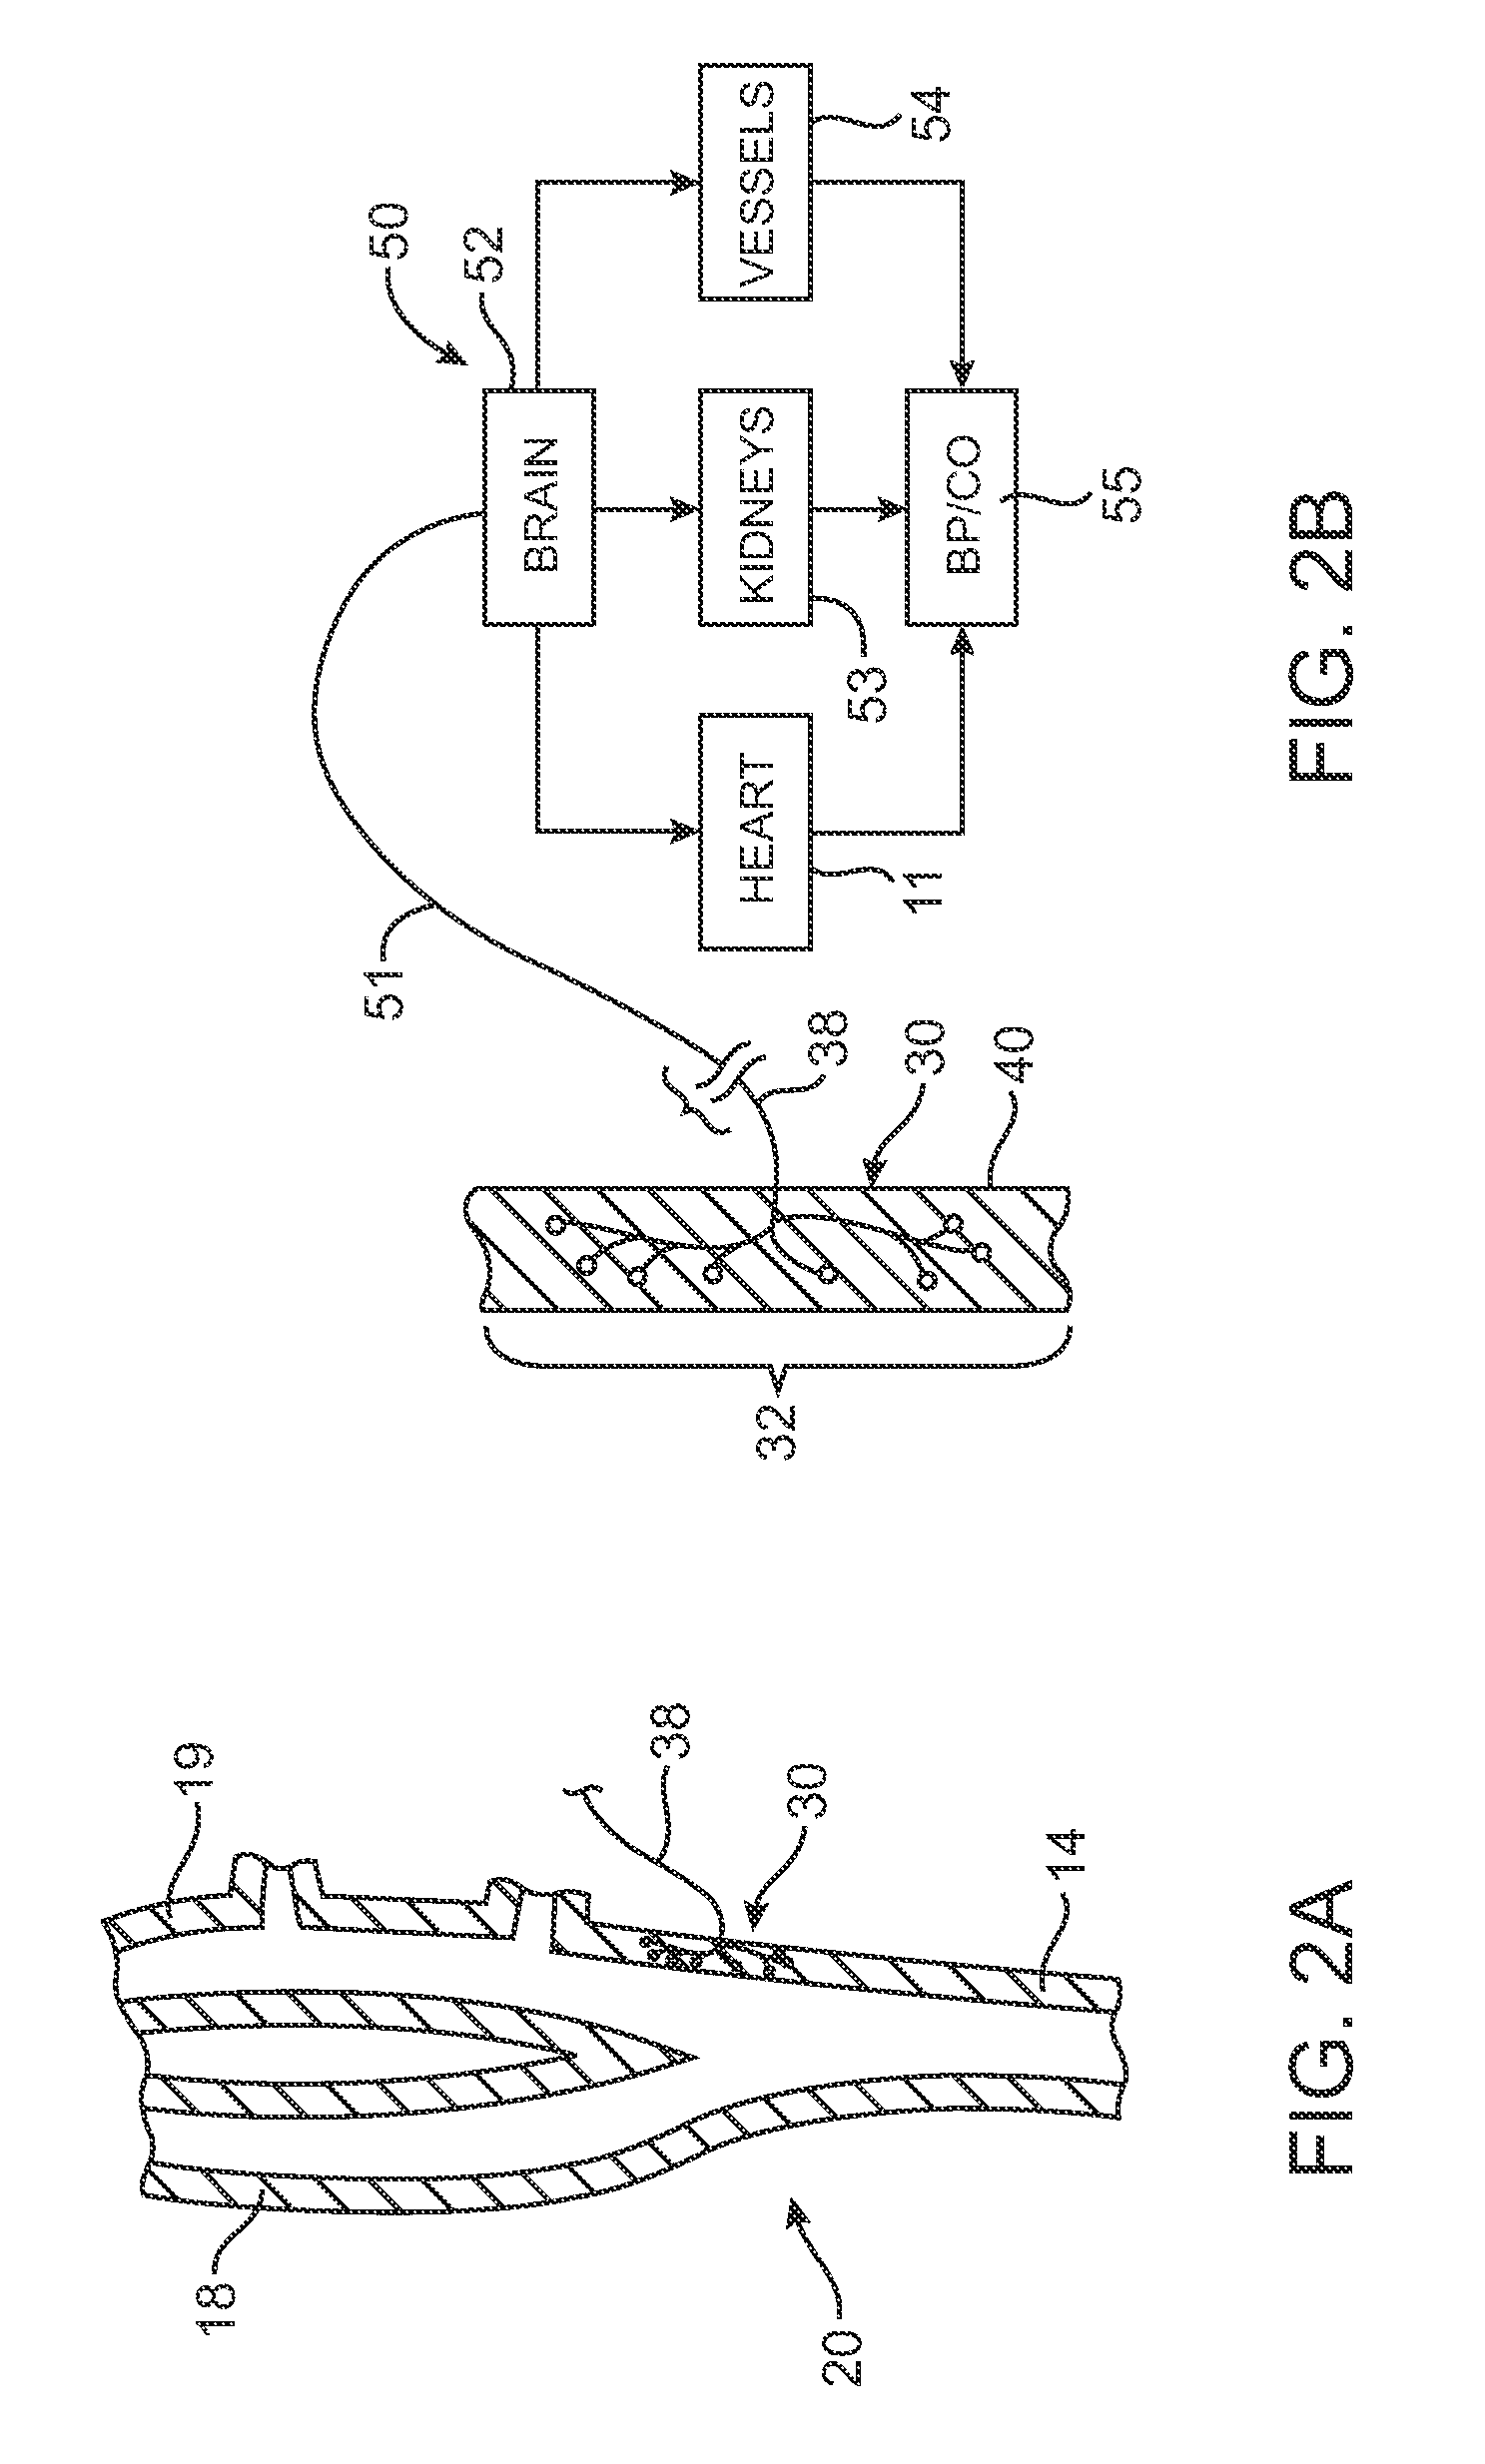 Electrode array structures and methods of use for cardiovascular reflex control